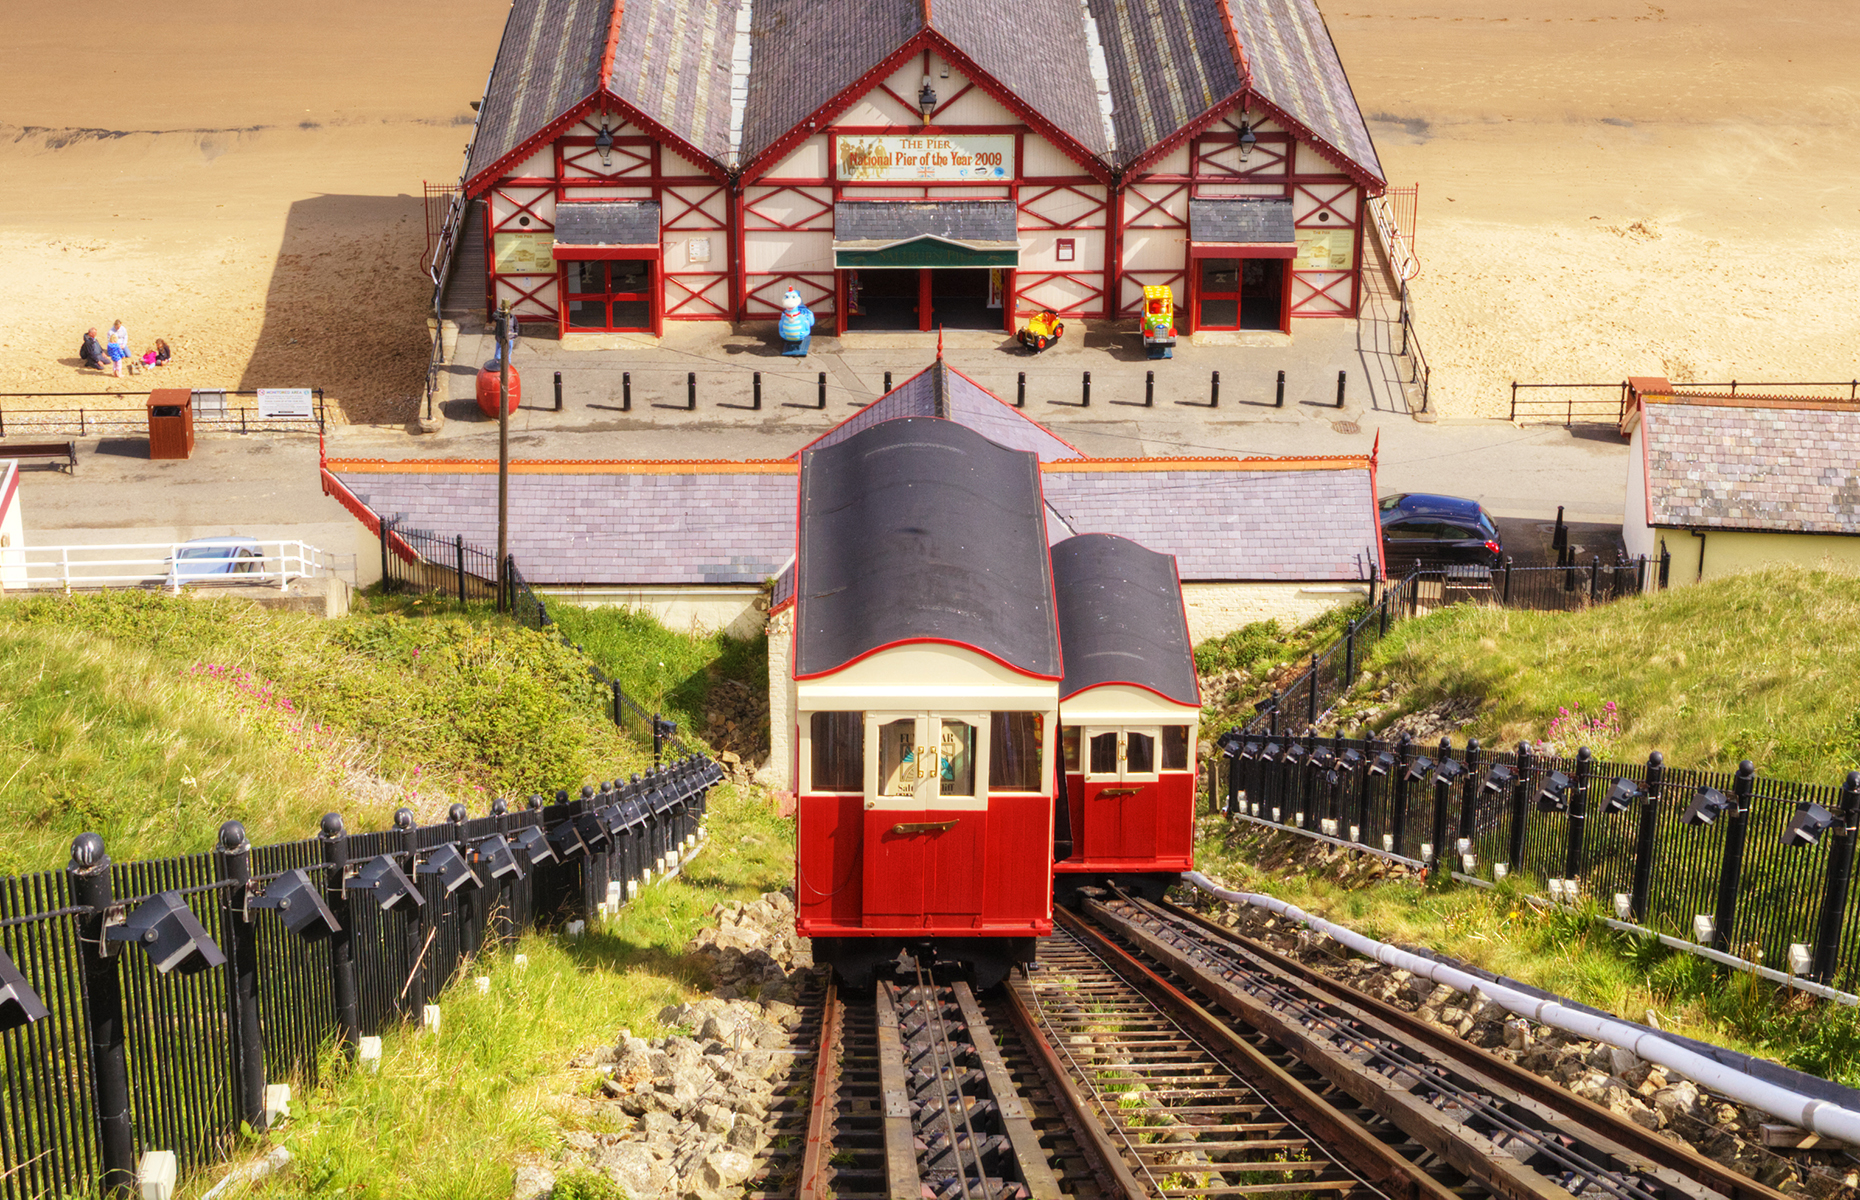 Victoria cliff lift, Saltburn-by-the-Sea, England. (Image:Travellight/Shutterstock)